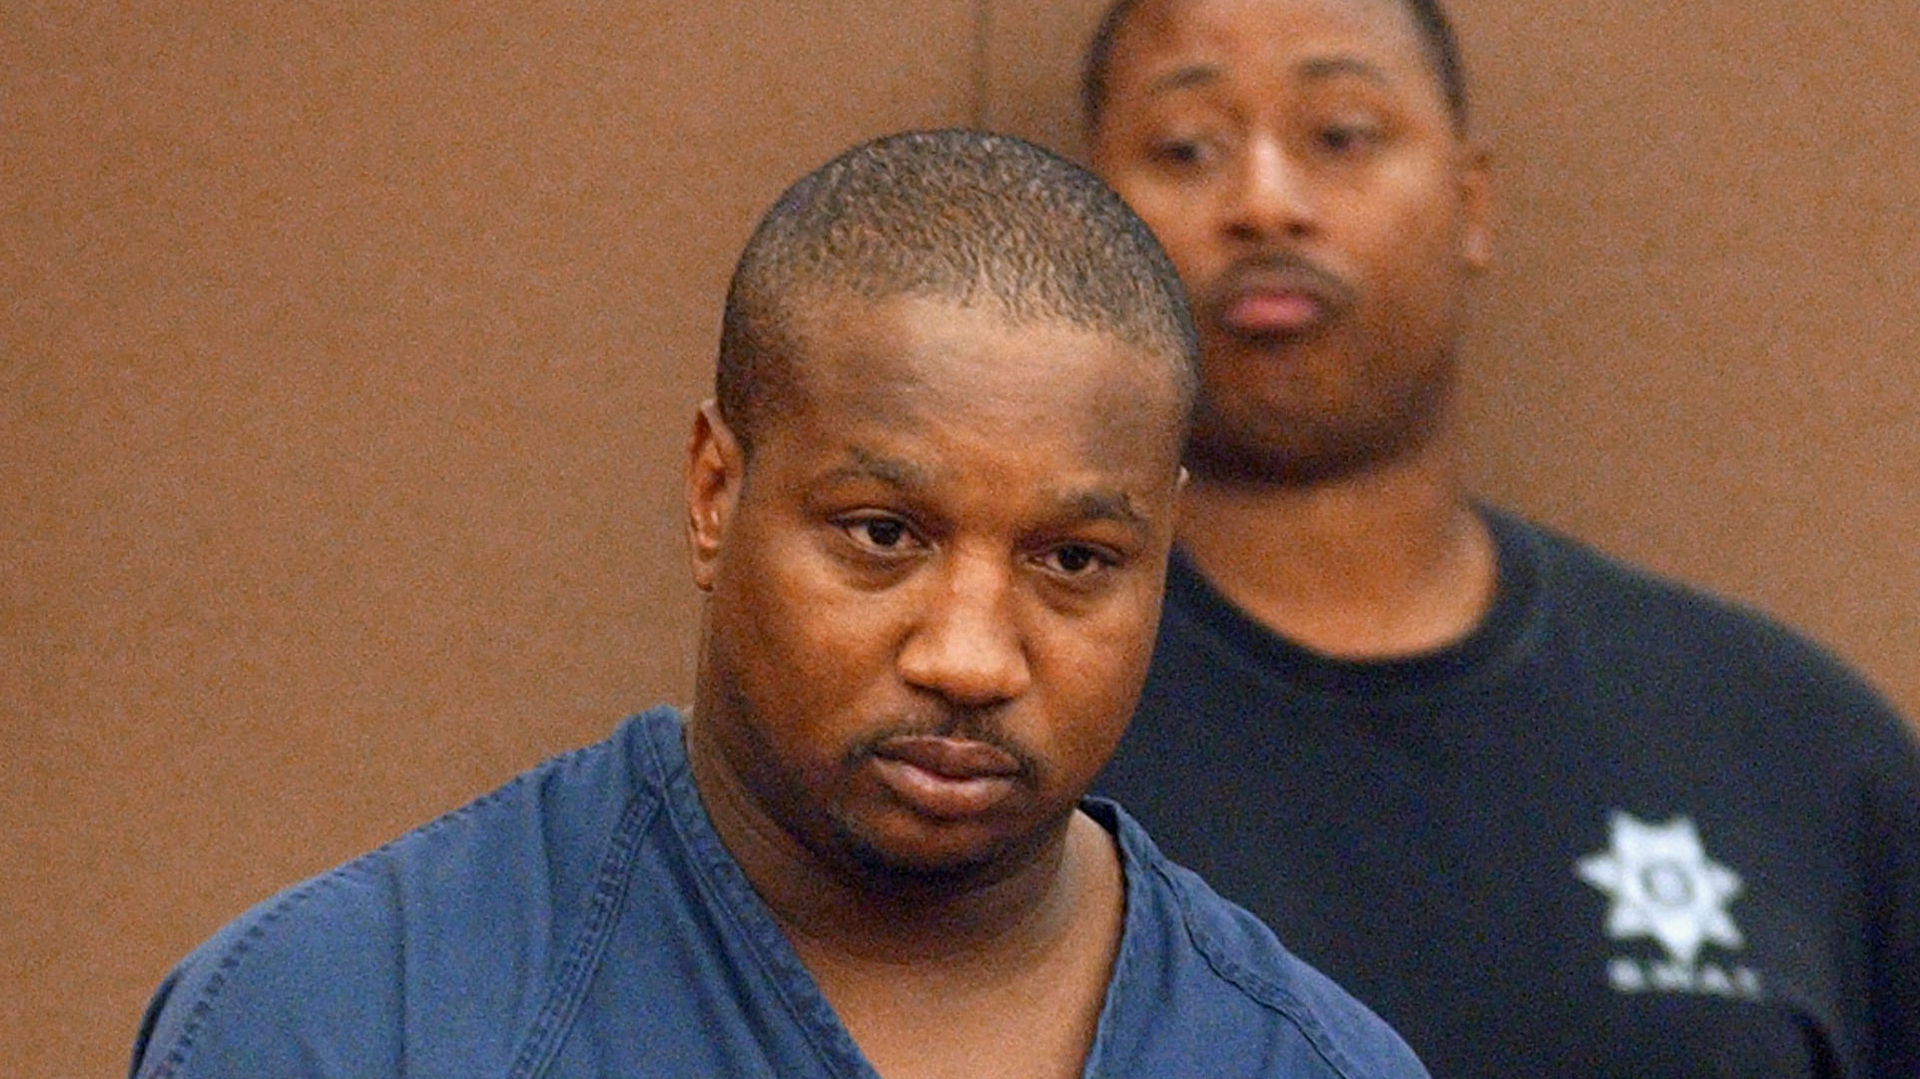 Who Were the Victims of Derrick Todd Lee, the Baton Rouge Serial Killer?